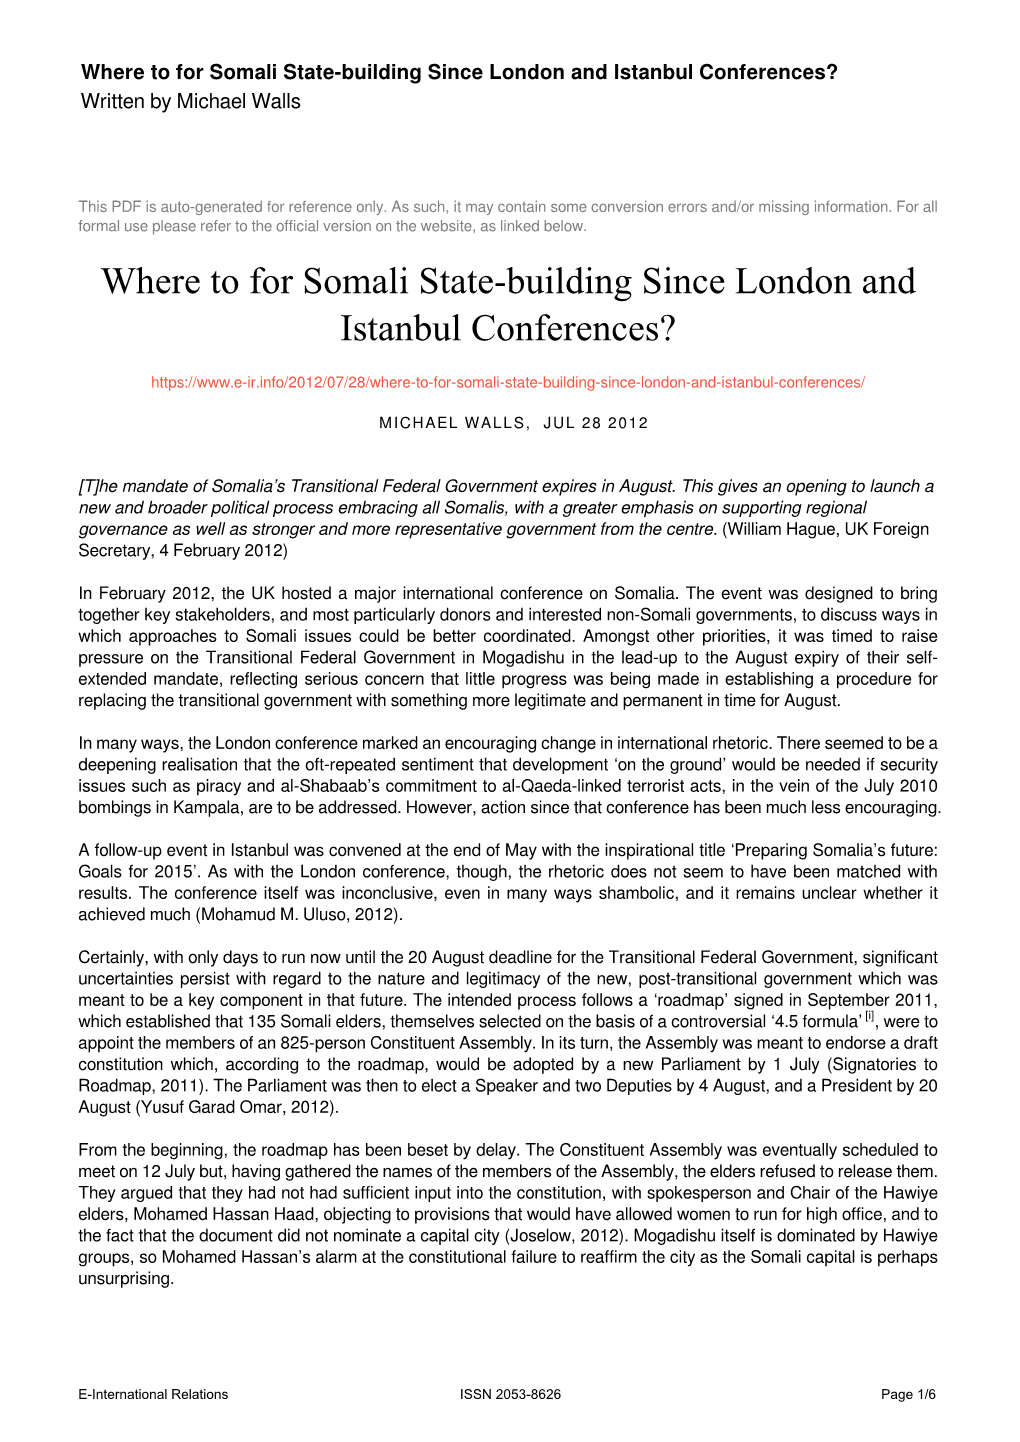 Where to for Somali State-Building Since London and Istanbul Conferences? Written by Michael Walls